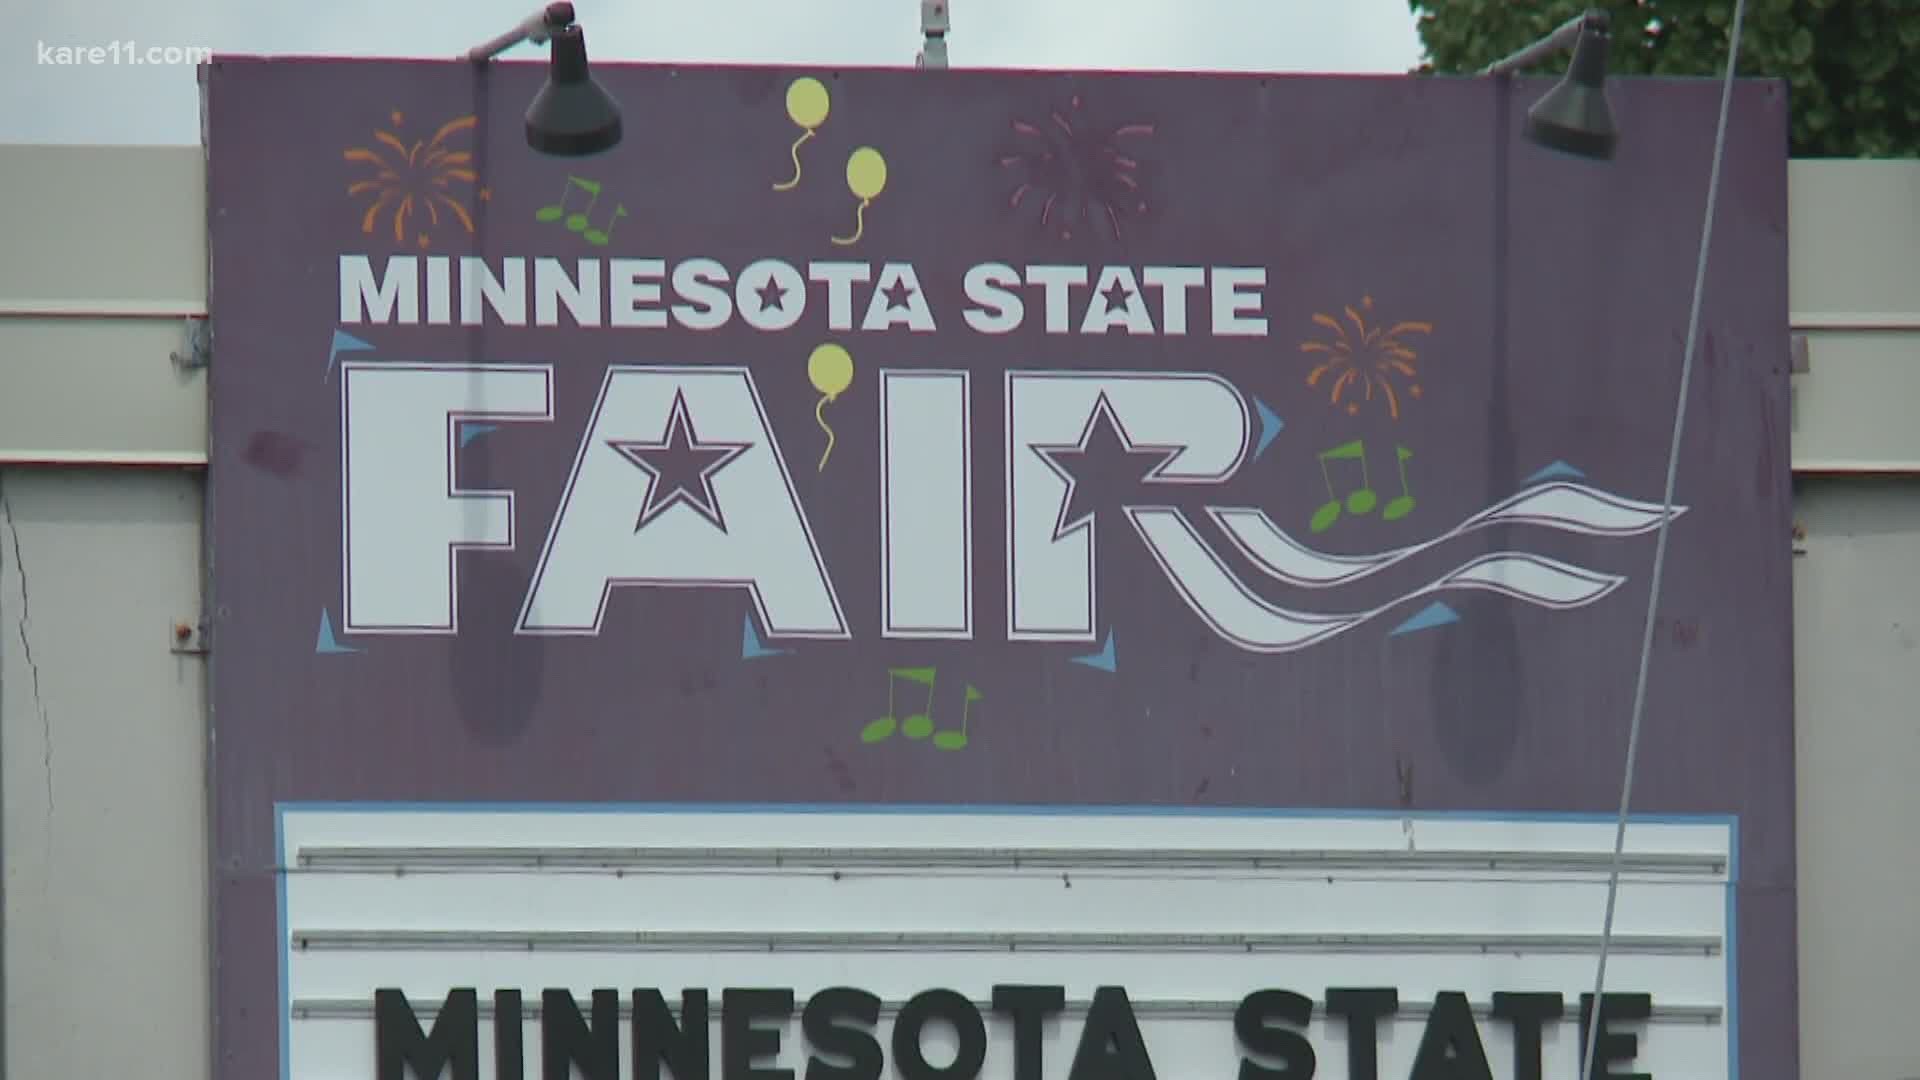 Summer just got a little sweeter, with 16 vendors from the Minnesota State Fair stepping in with your favorite summer snacks